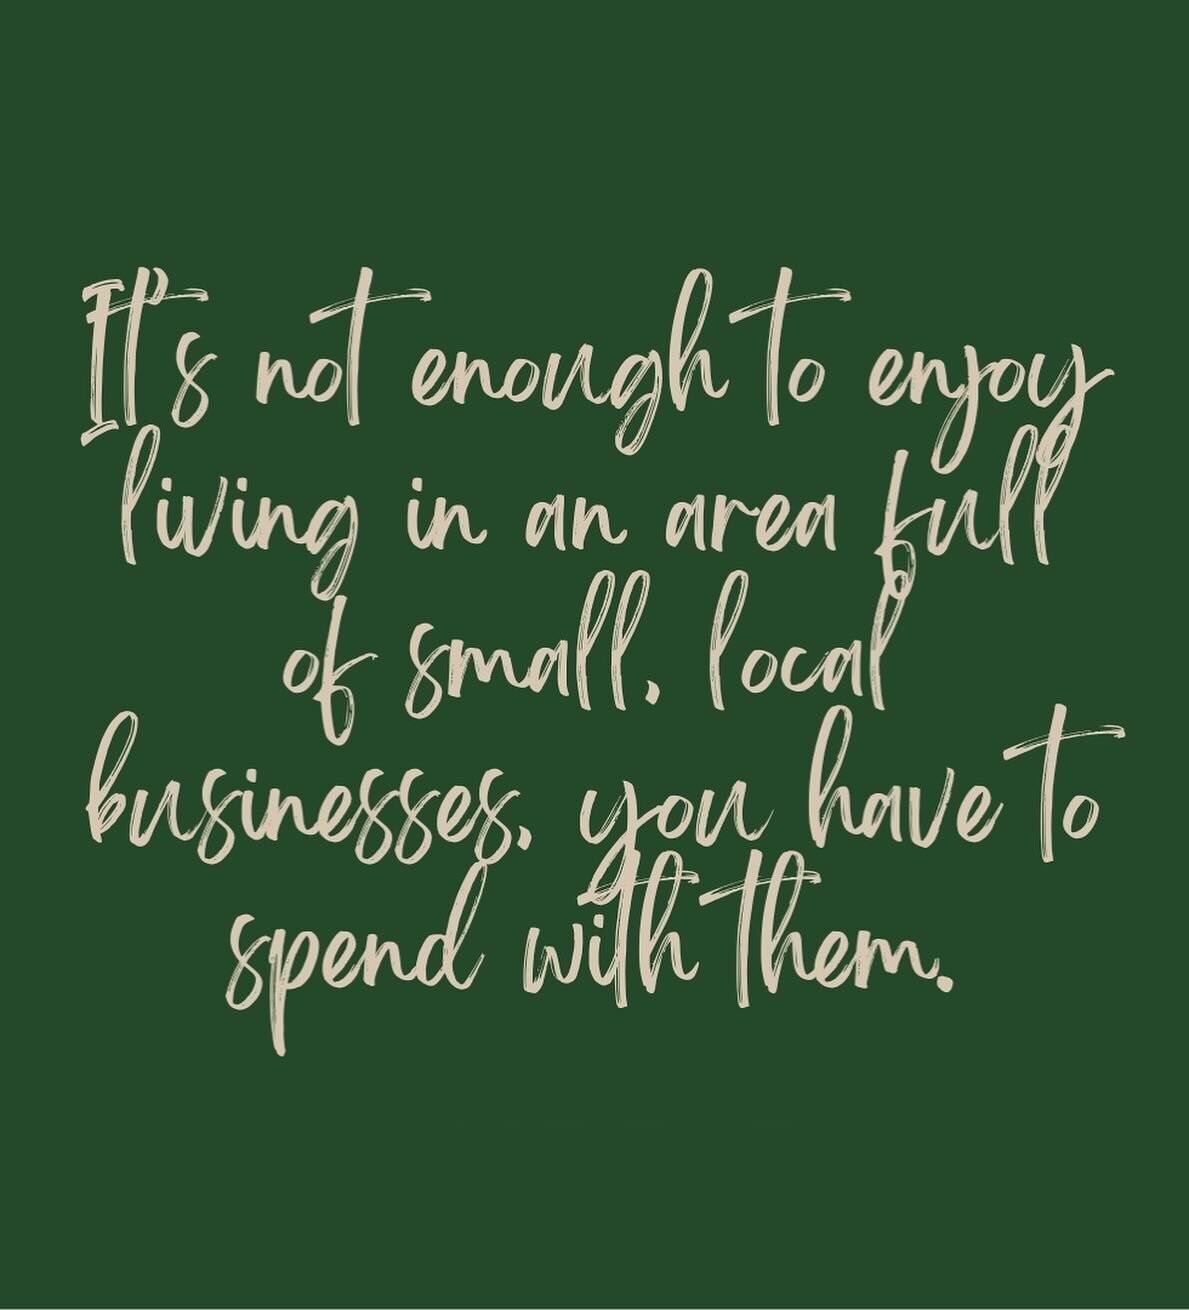 Just a couple of parting thoughts and a reminder to support small businesses when you can.

1) Living in a lovely neighbourhood full of beautiful shops, restaurants, cafes, salons, etc brings a lot of joy to the residents but these businesses need pu